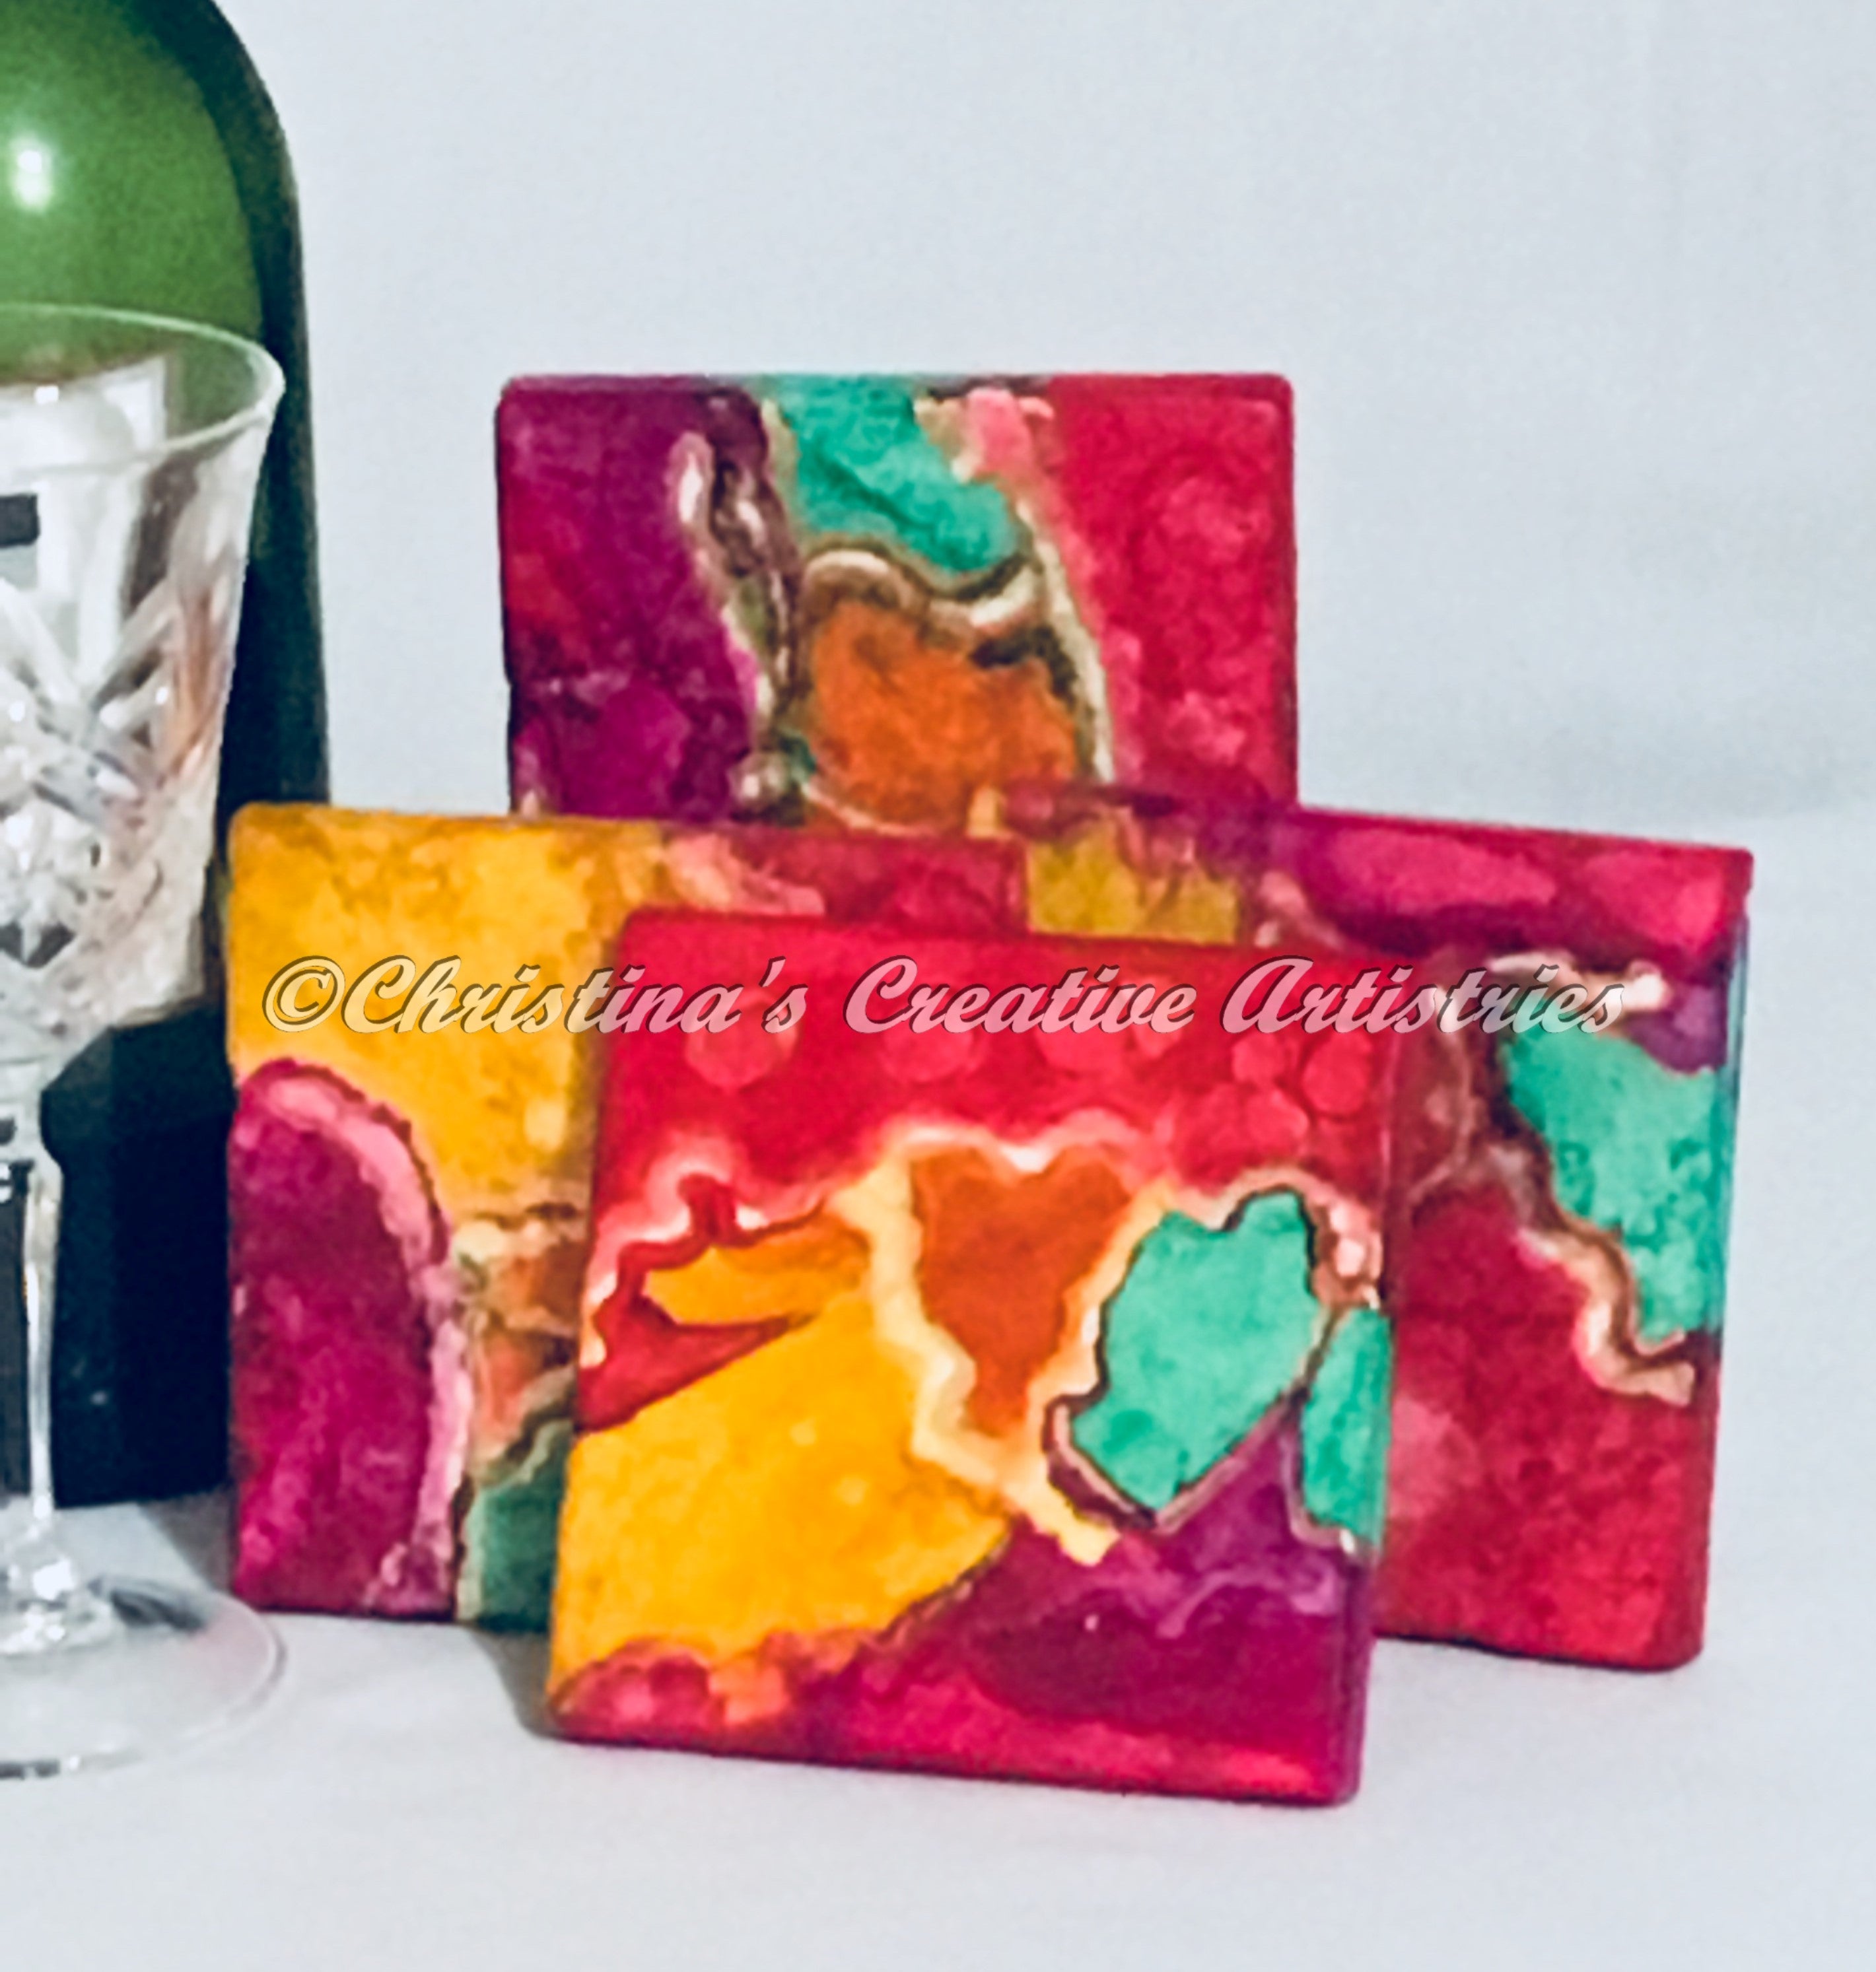 Features 4x4 stone tile, hand painted in teal, magenta, yellow, orange and red. All coasters are sealed and cork backed.  Iron coaster stand included.